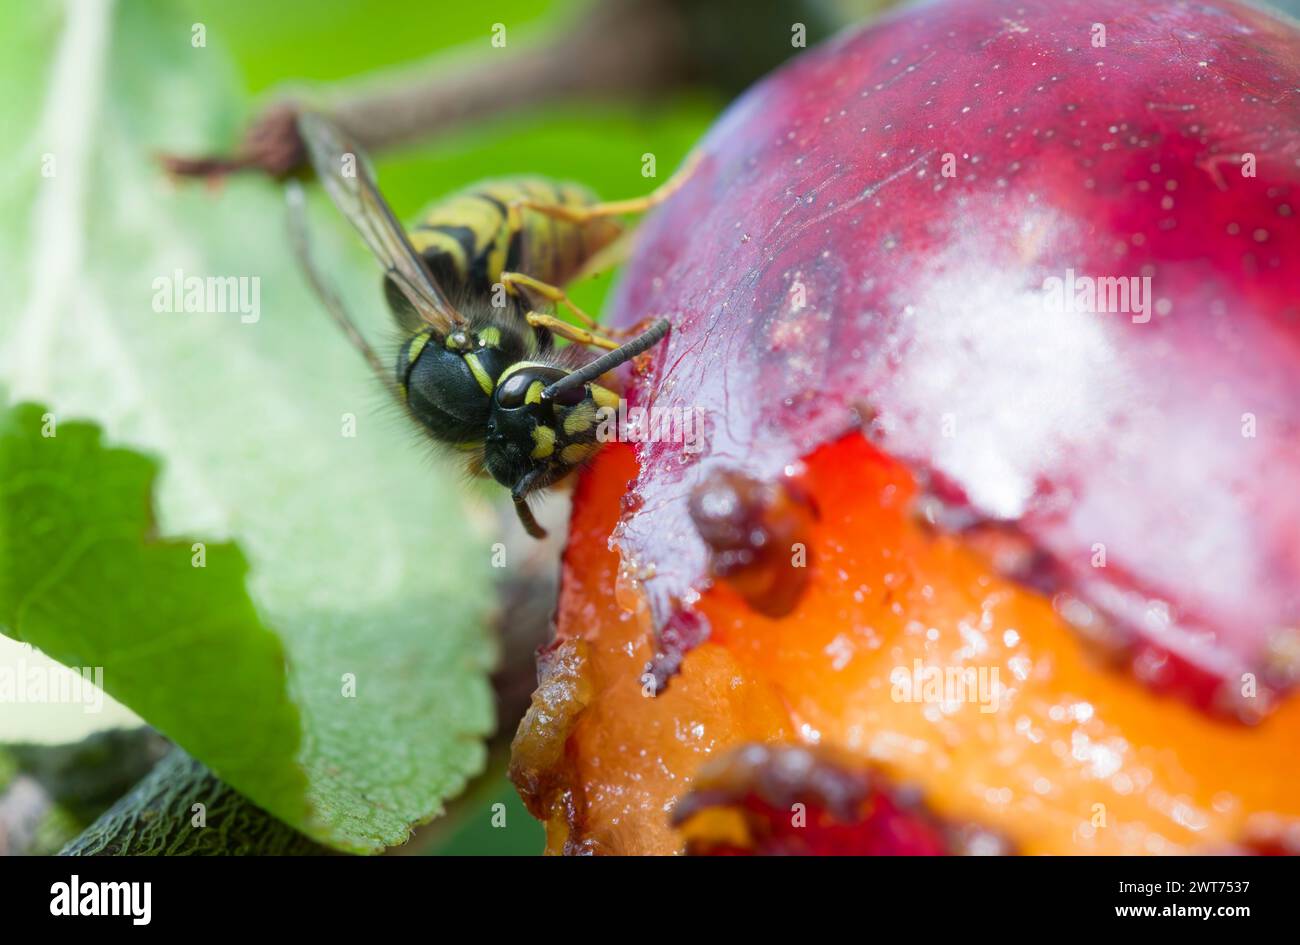 Common wasp (Vespula vulgaris) eating a ripe plum growing on a tree in a garden in autumn, UK Stock Photo